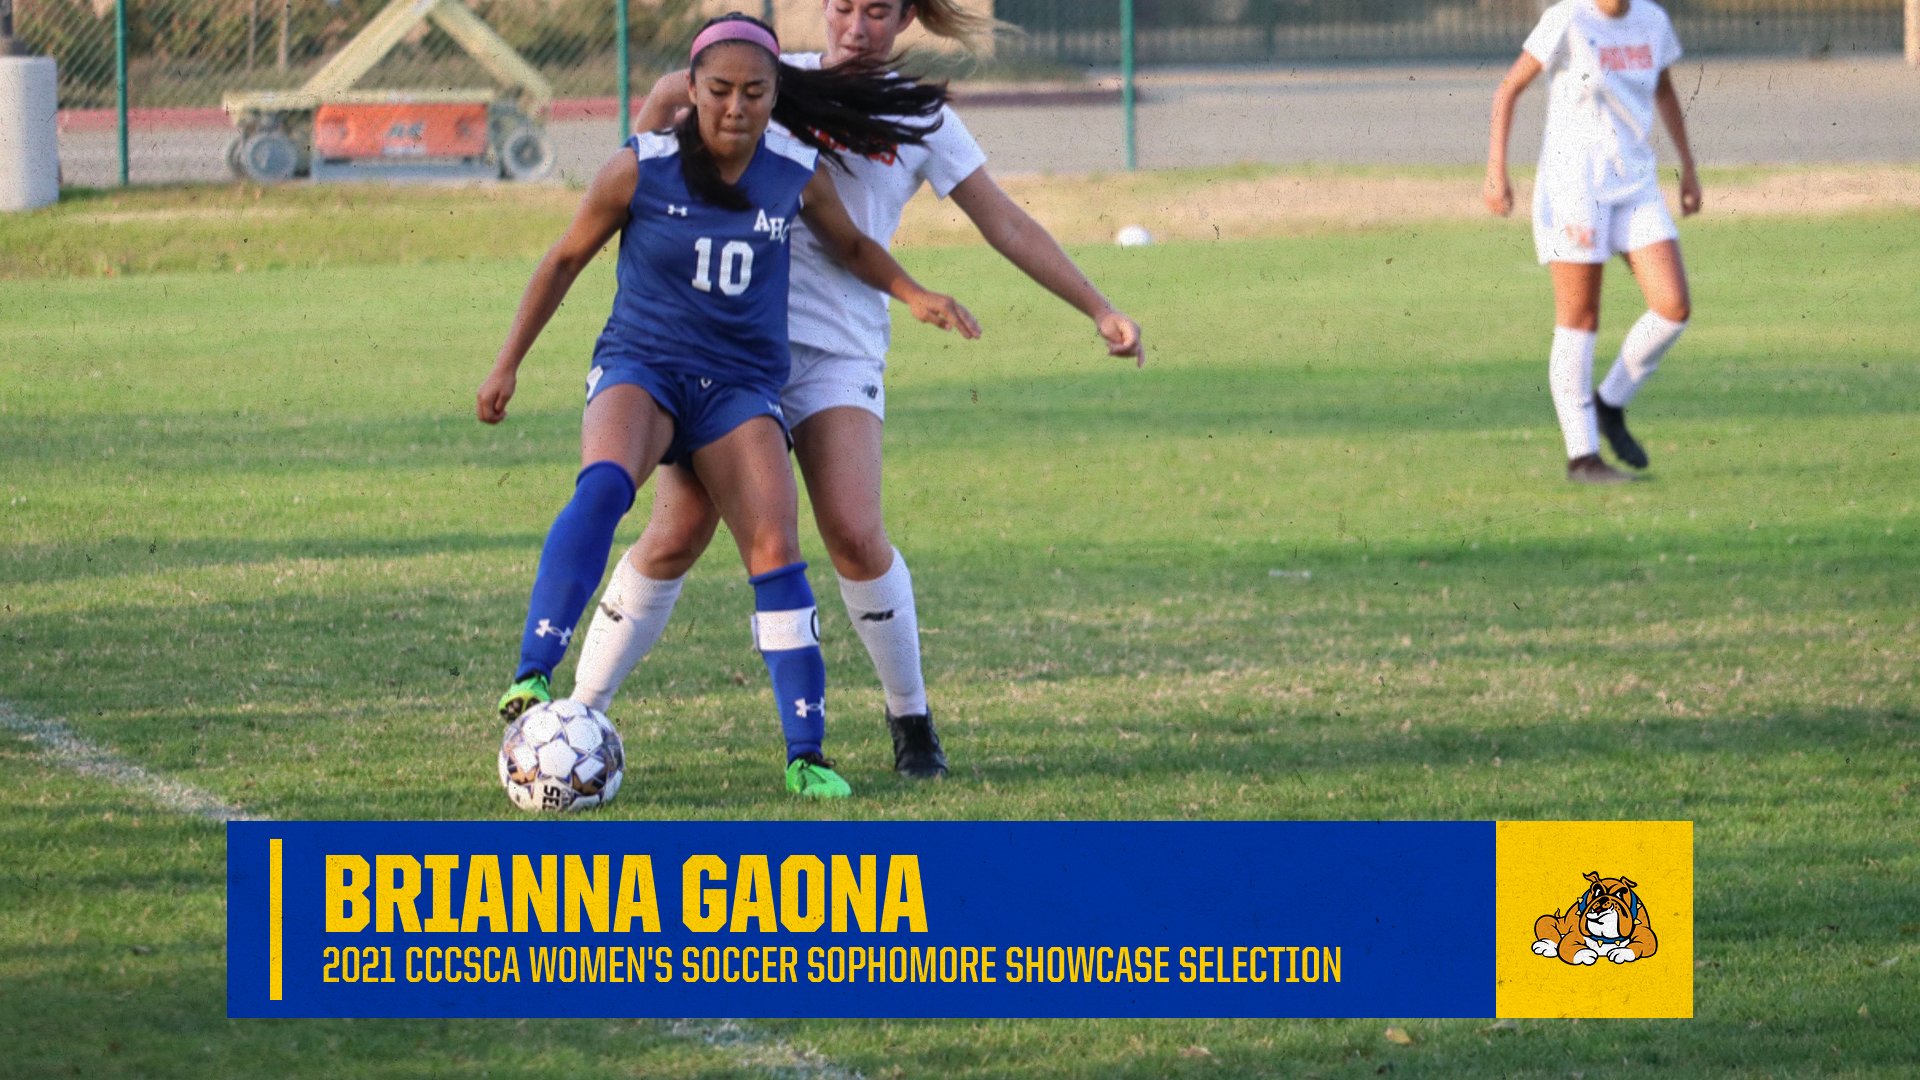 Brianna Gaona Selected for CCCSCA Women's Soccer Sophomore Showcase